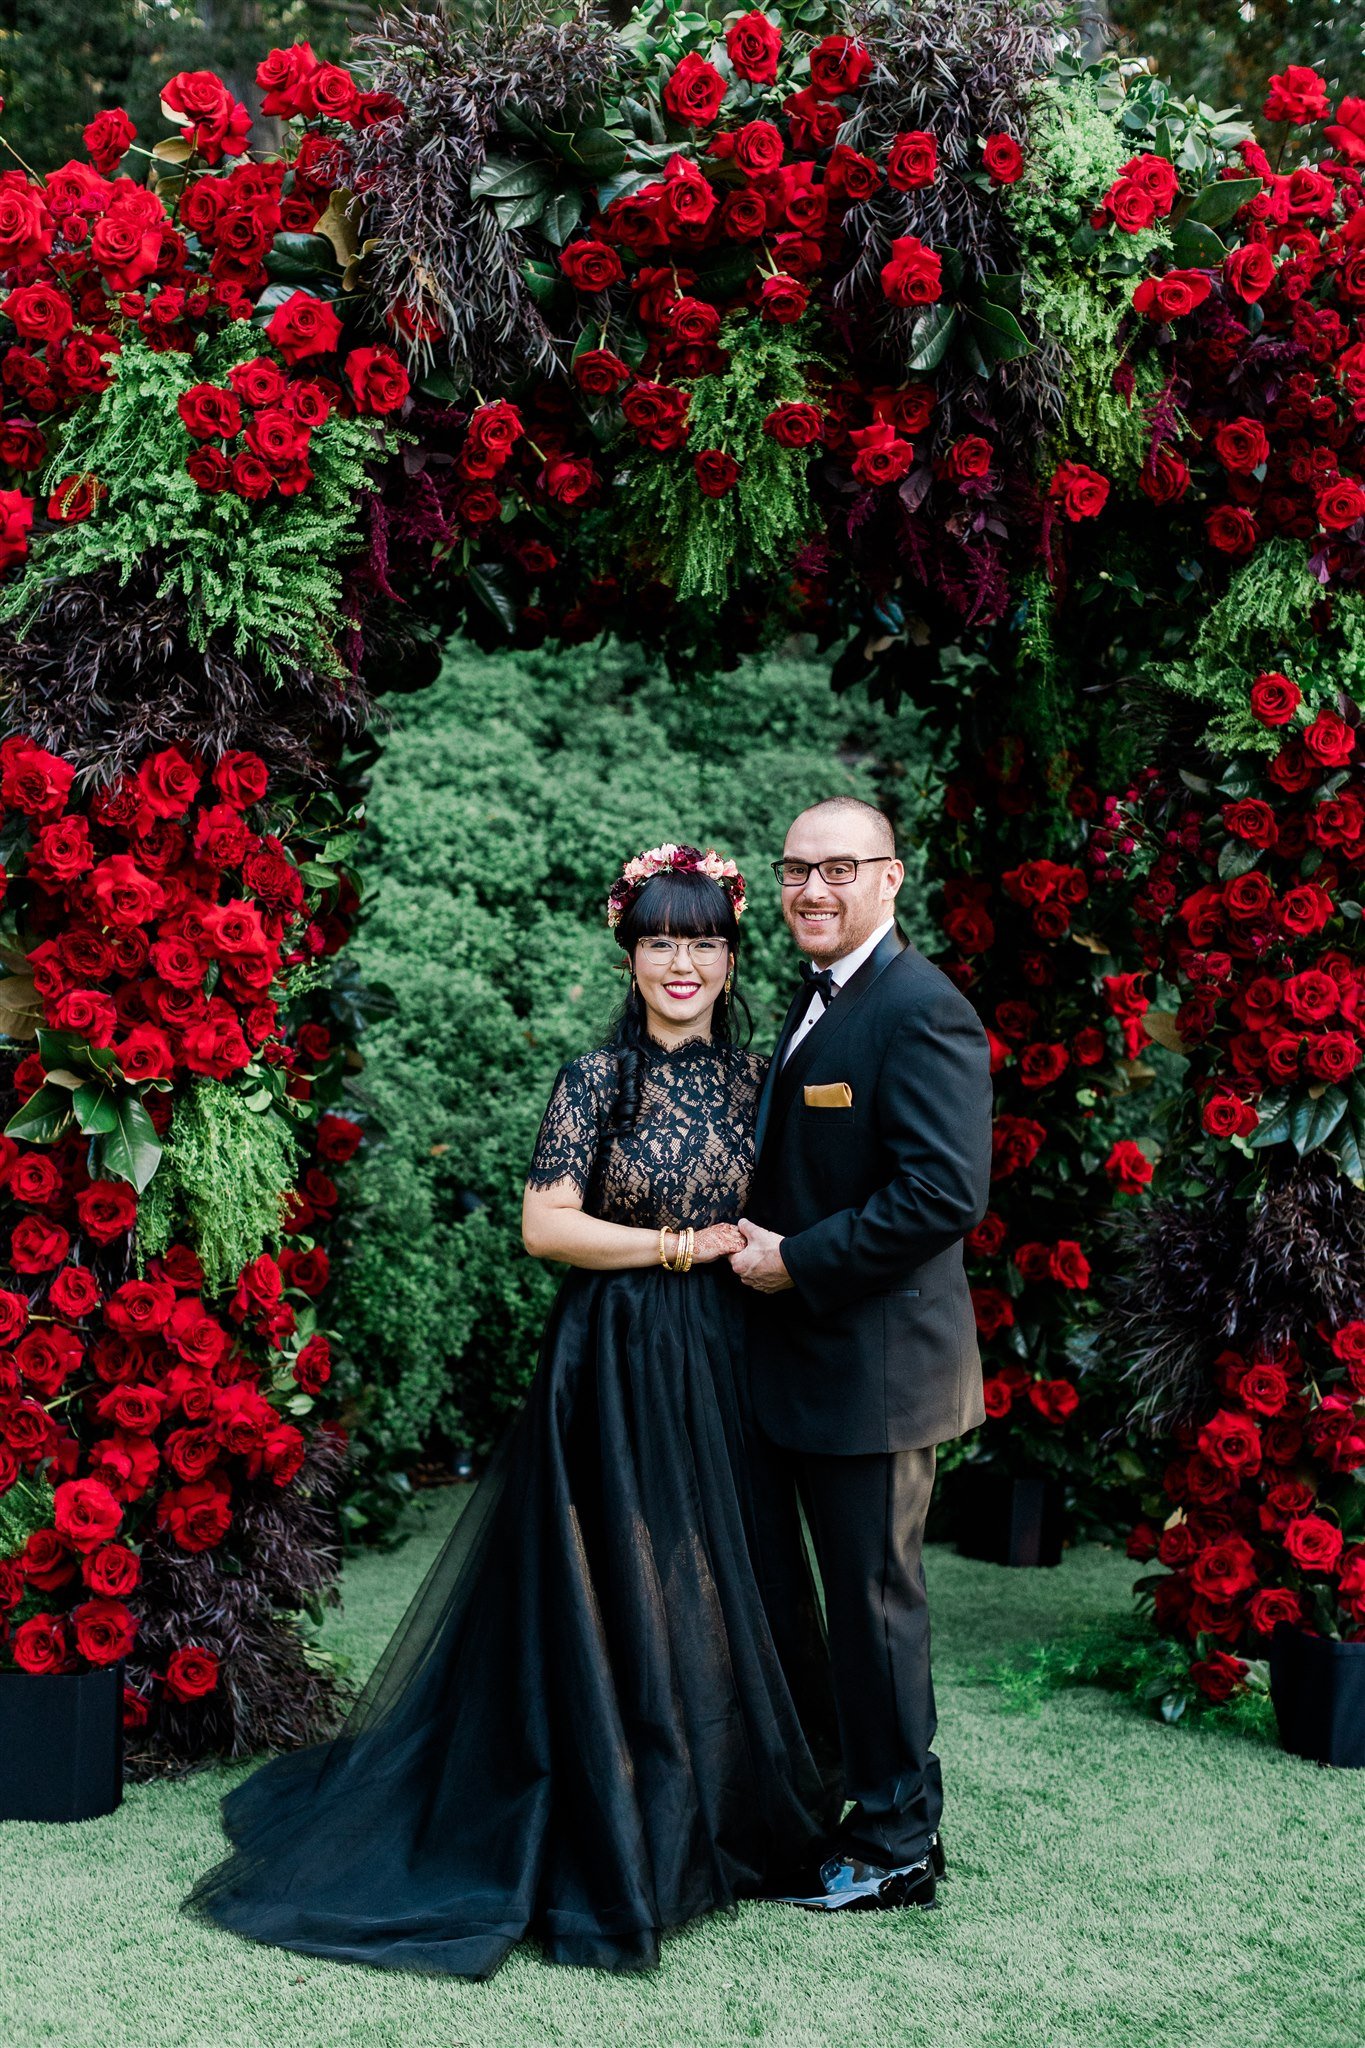 JOWY-Productions-Vibrant-Wedding-in-Red-and-Black-Hues-Valorie-Darling-8.jpg